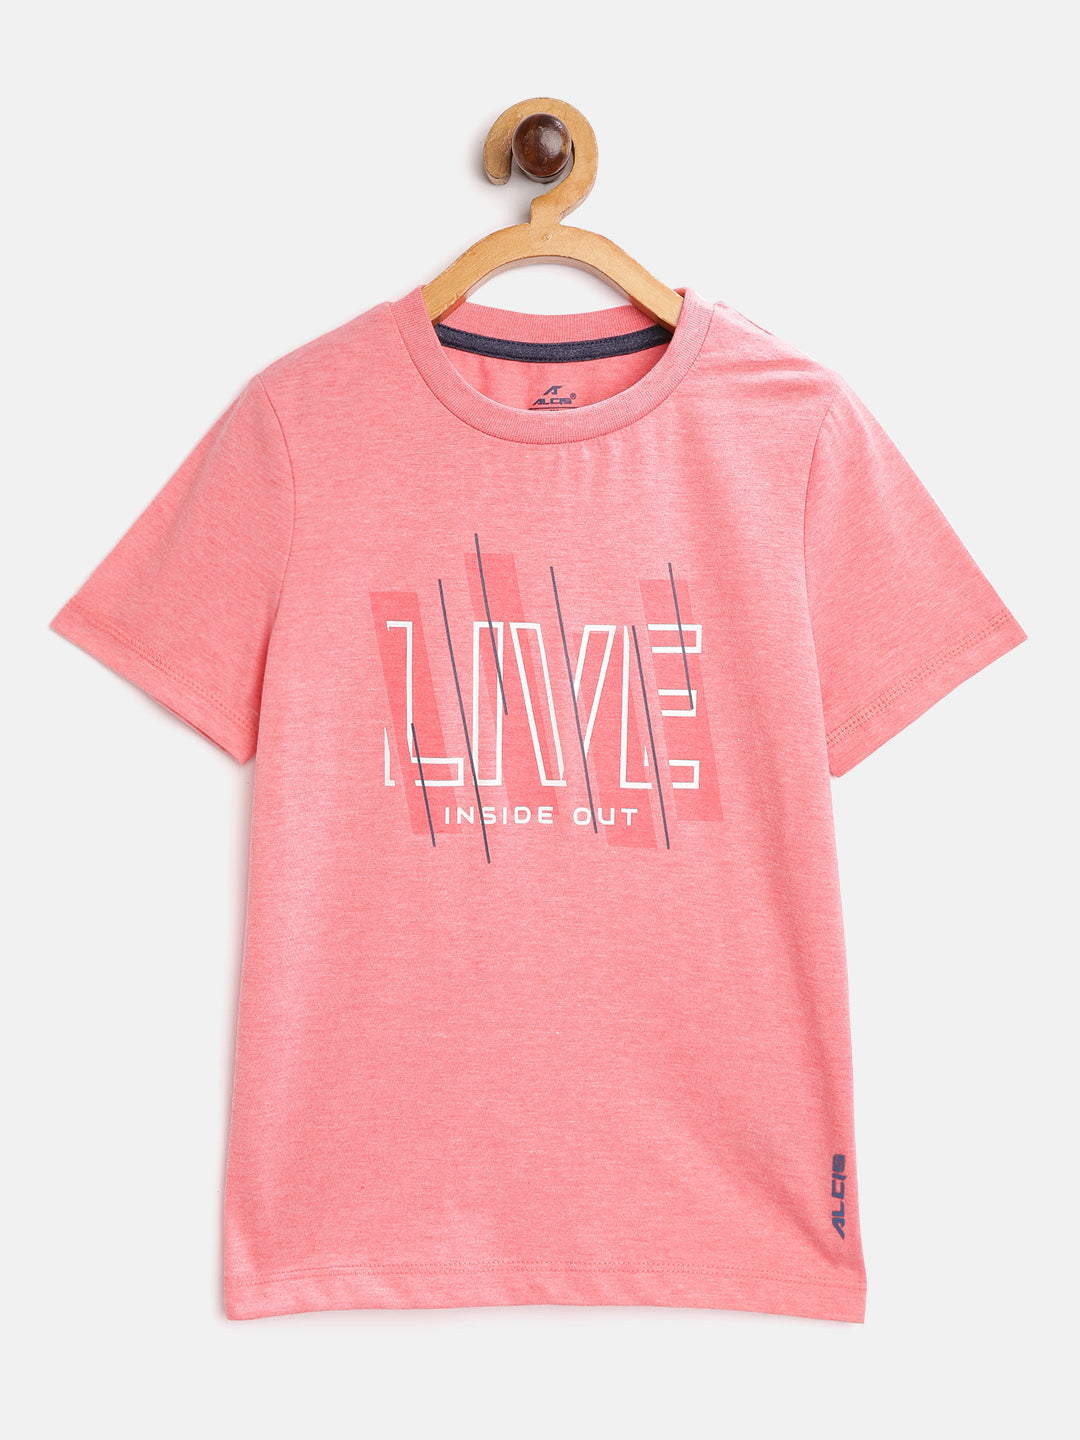 Alcis Boys Coral Pink Printed Round Neck T-shirt BSTSS0012-4Y